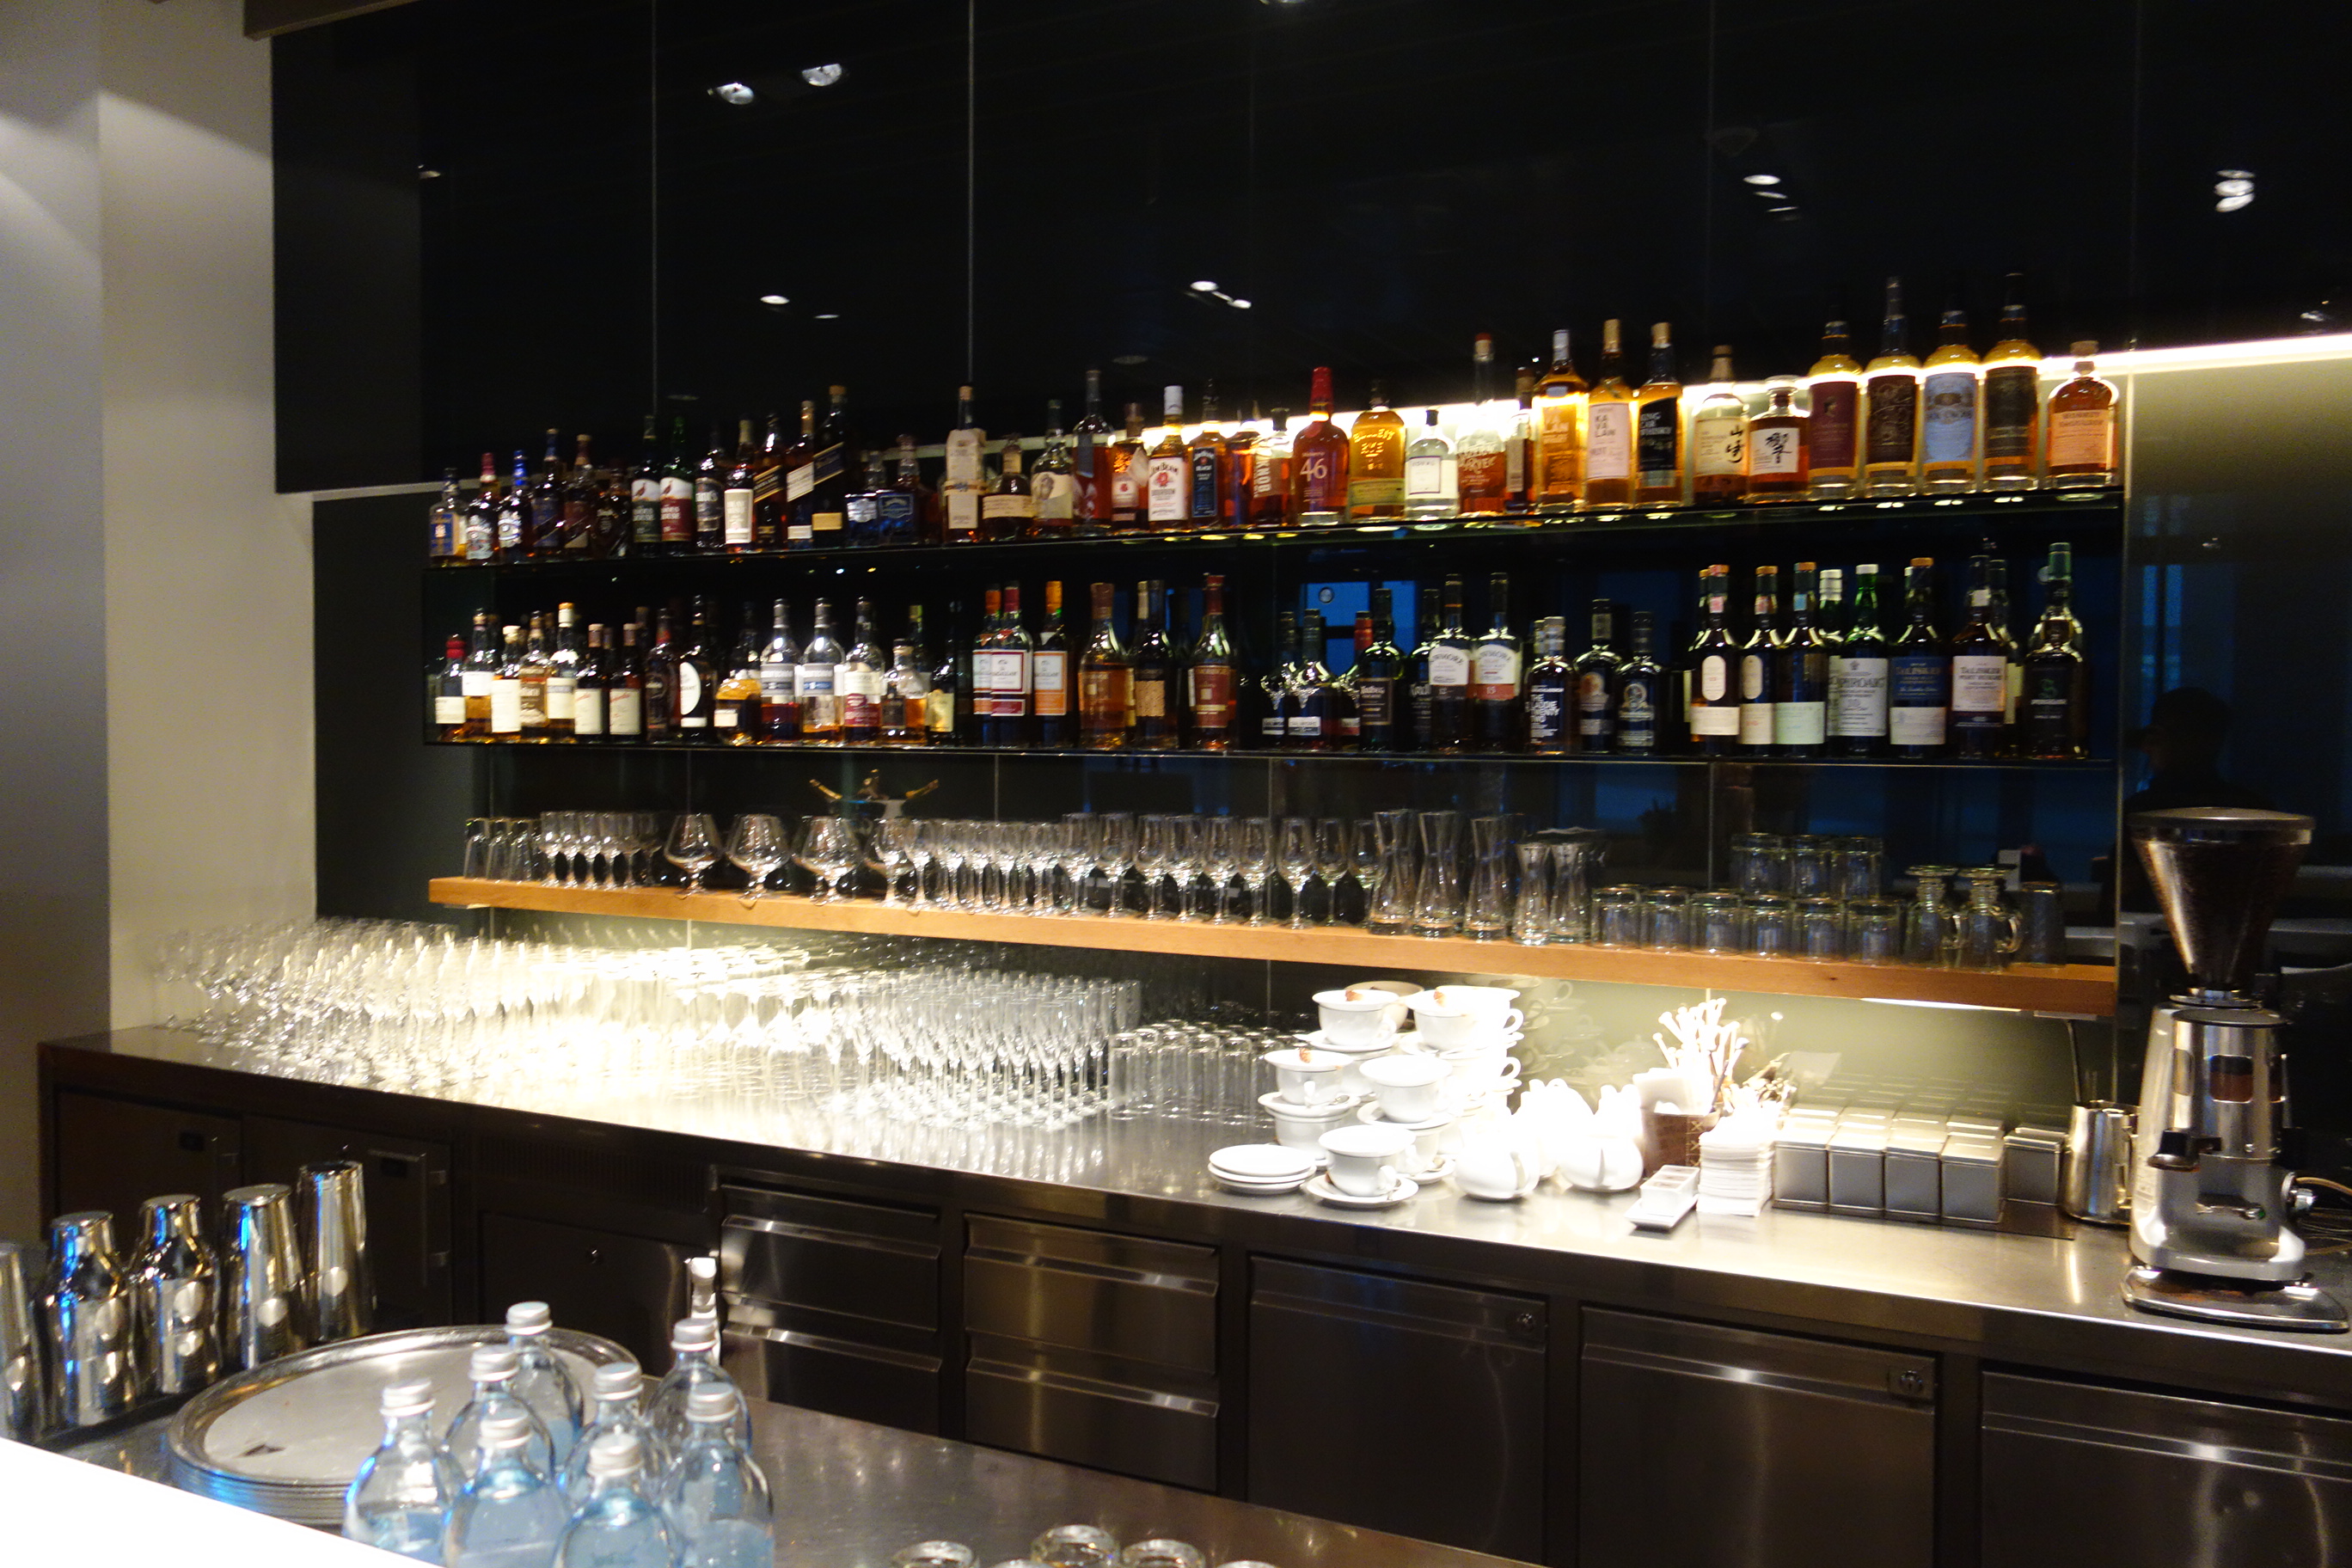 Very well-stocked bar